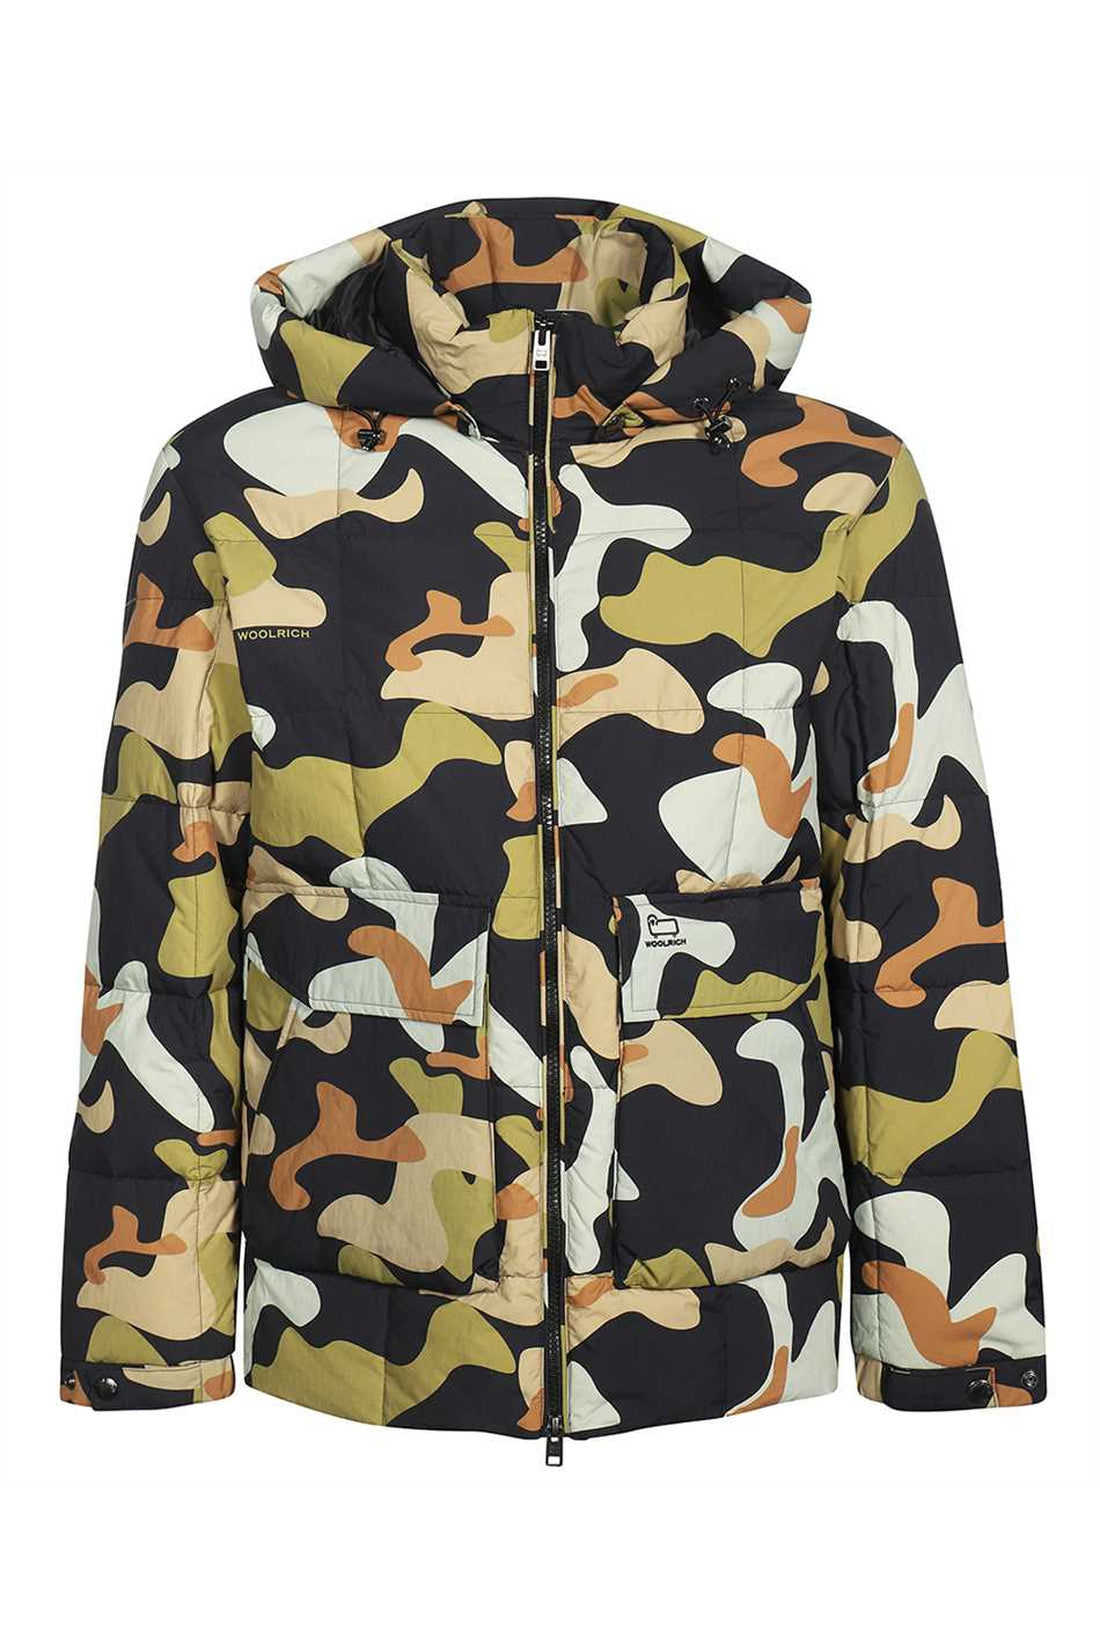 Woolrich-OUTLET-SALE-Hooded nylon down jacket-ARCHIVIST